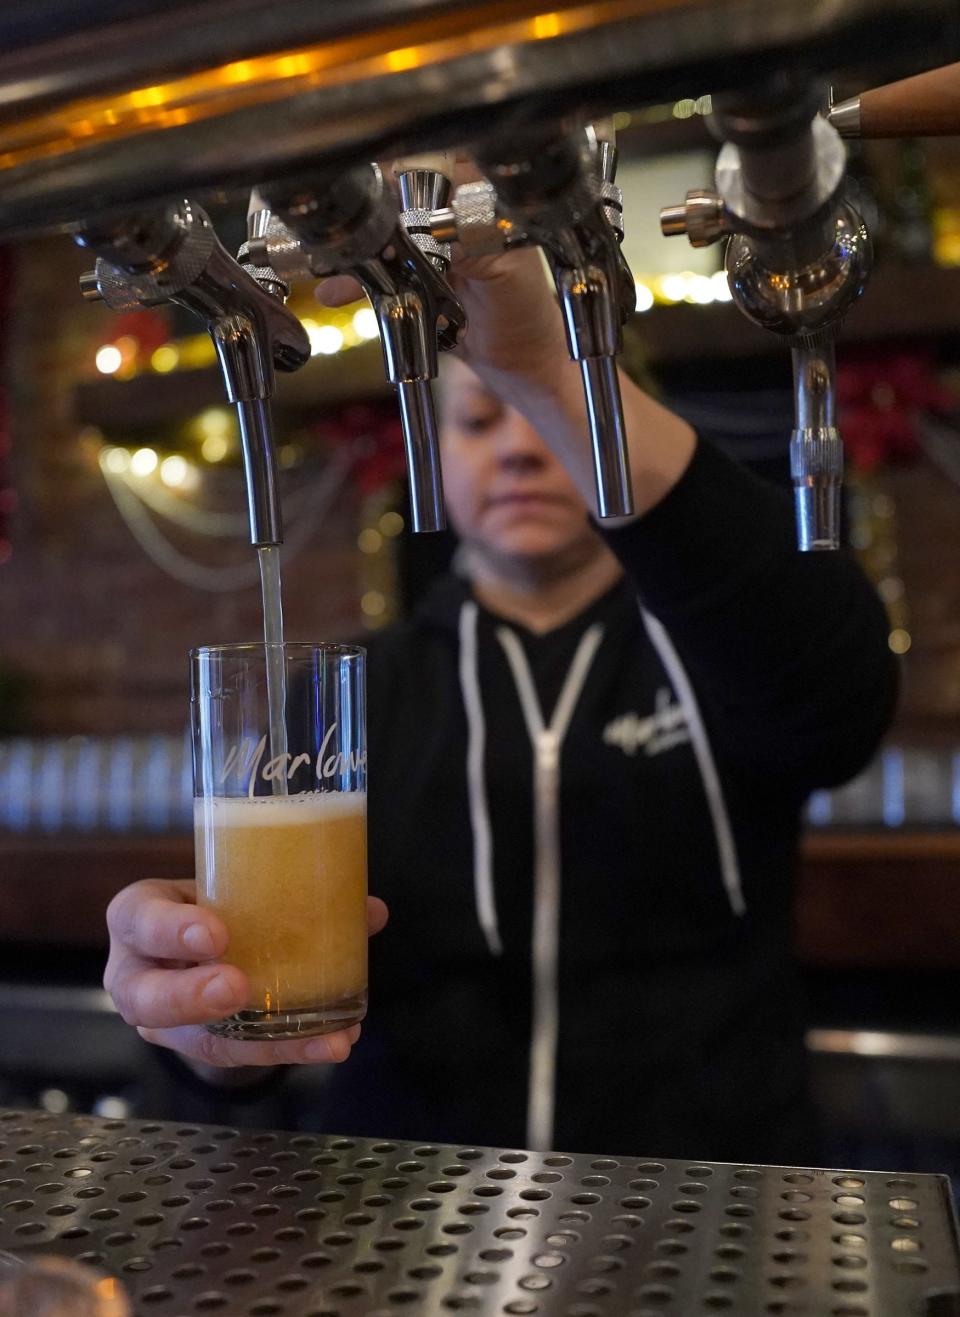 Carla Waclawski pulls on a tap at Marlowe Artisanal Ales in Nyack on Wednesday, November 30, 2022.